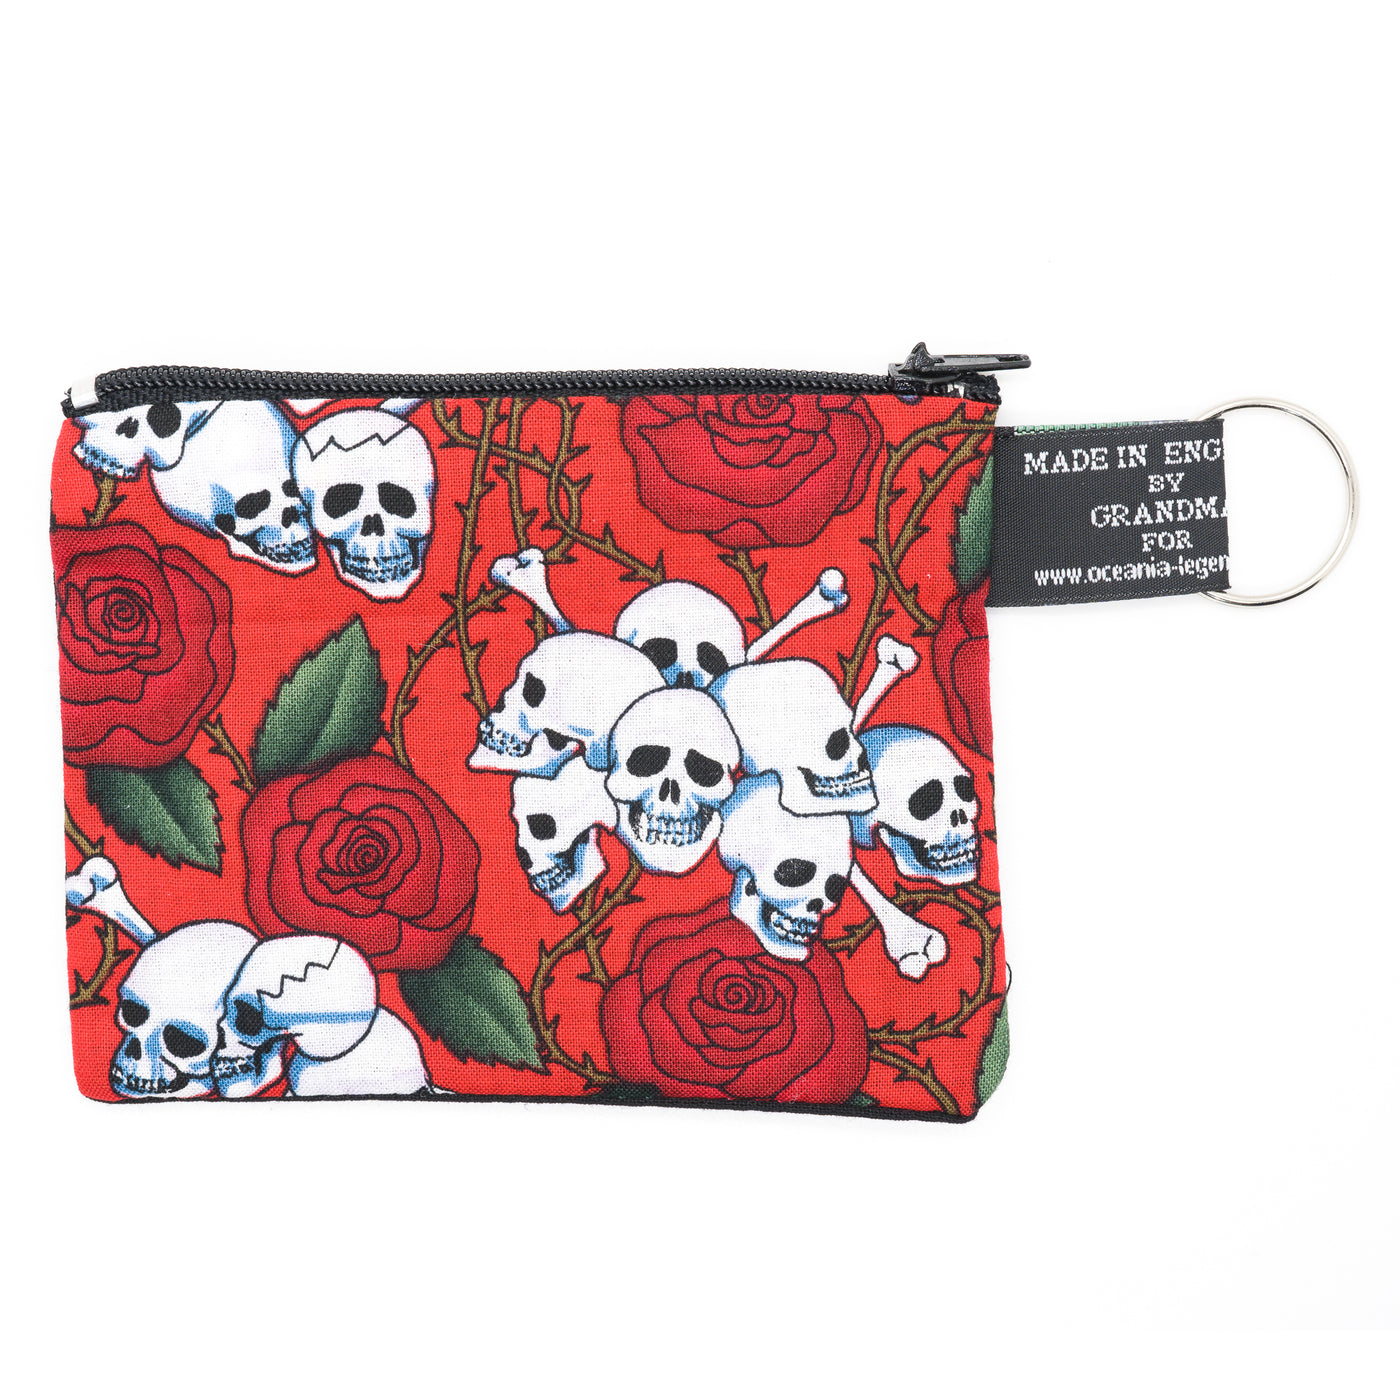 Skull & Crossbones with roses design on our handmade zipped cotton coin & card purse, with optional RFID Blocker